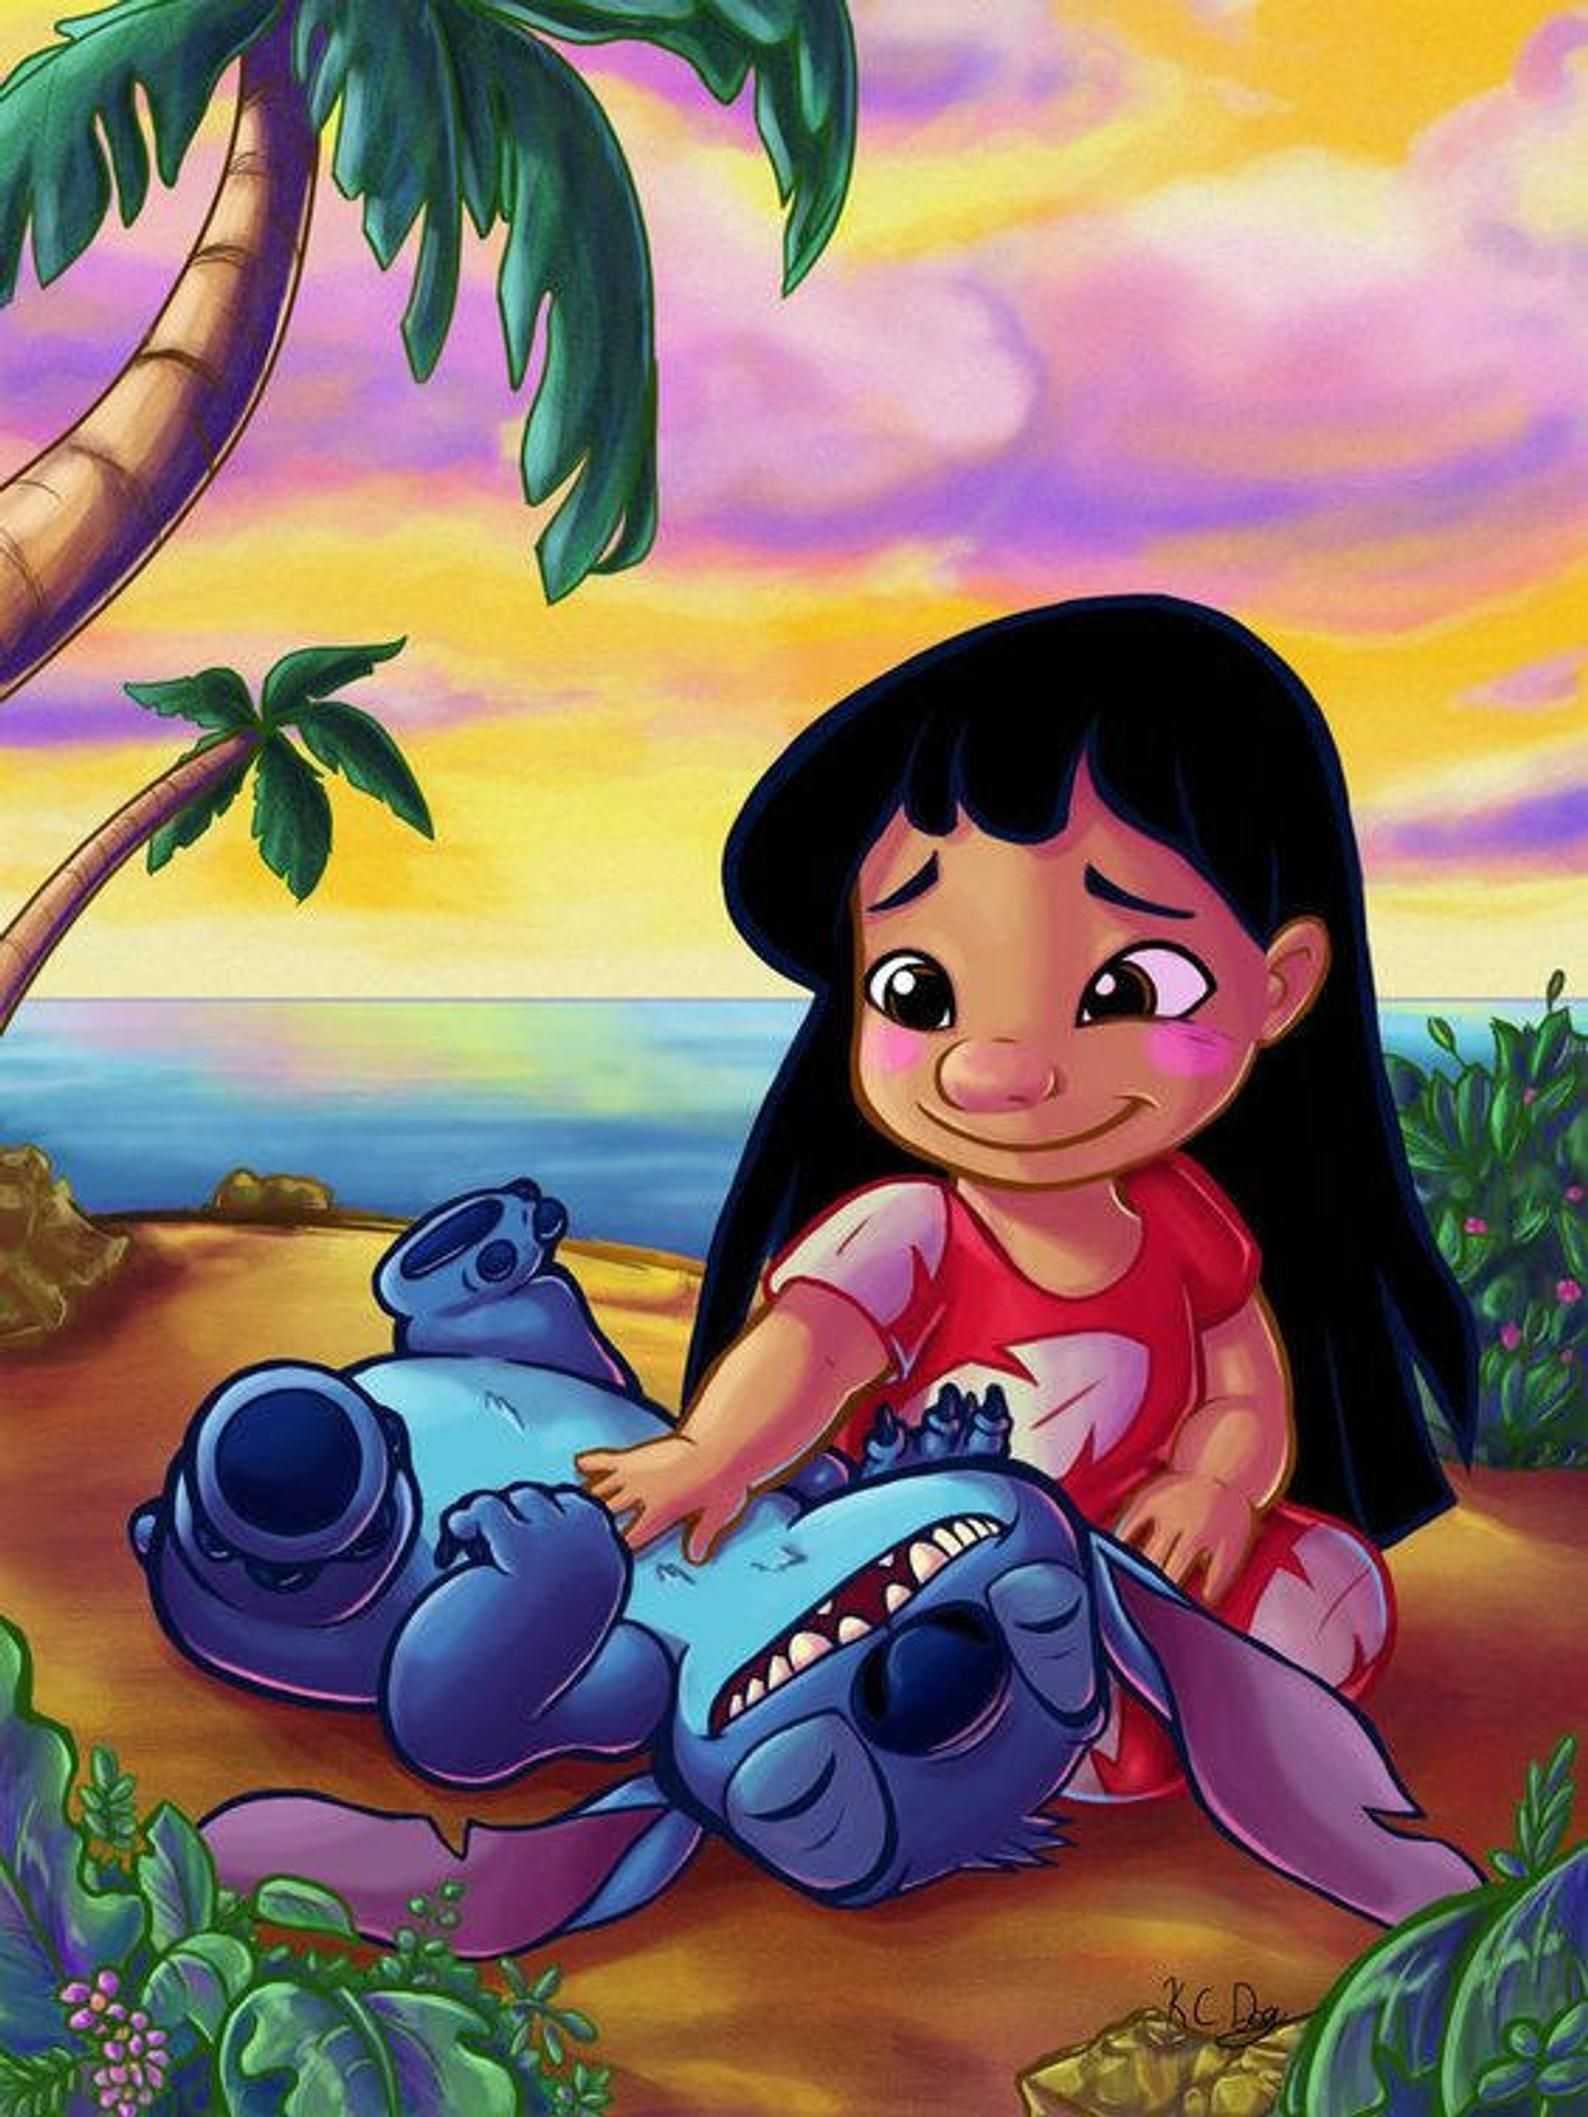 Wallpaper Lilo And Stitch Iphone Kolpaper Awesome Free Hd Wallpapers